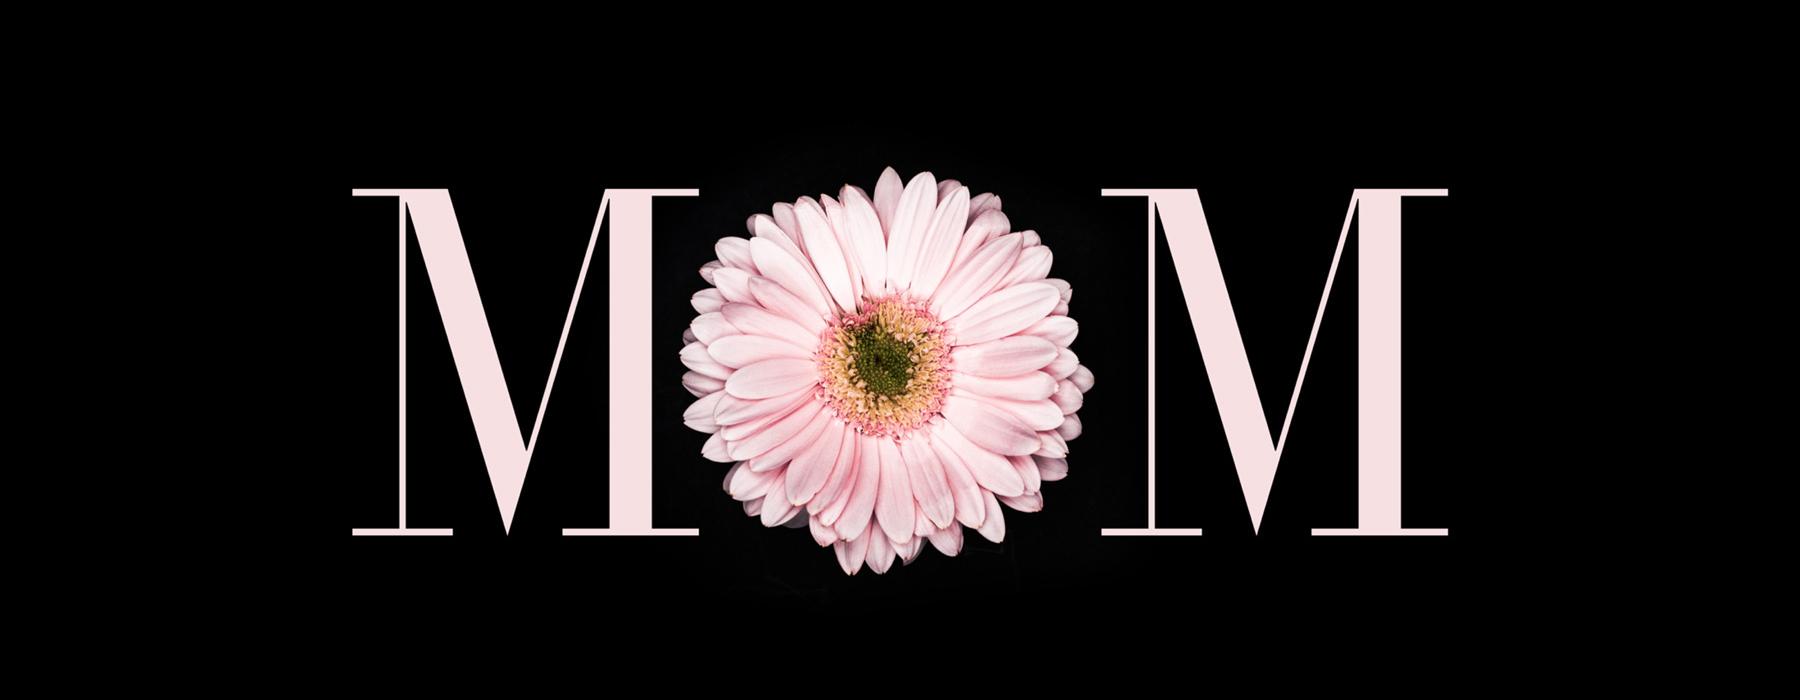 Word MOM With Letter O Represented By A Pink Flower